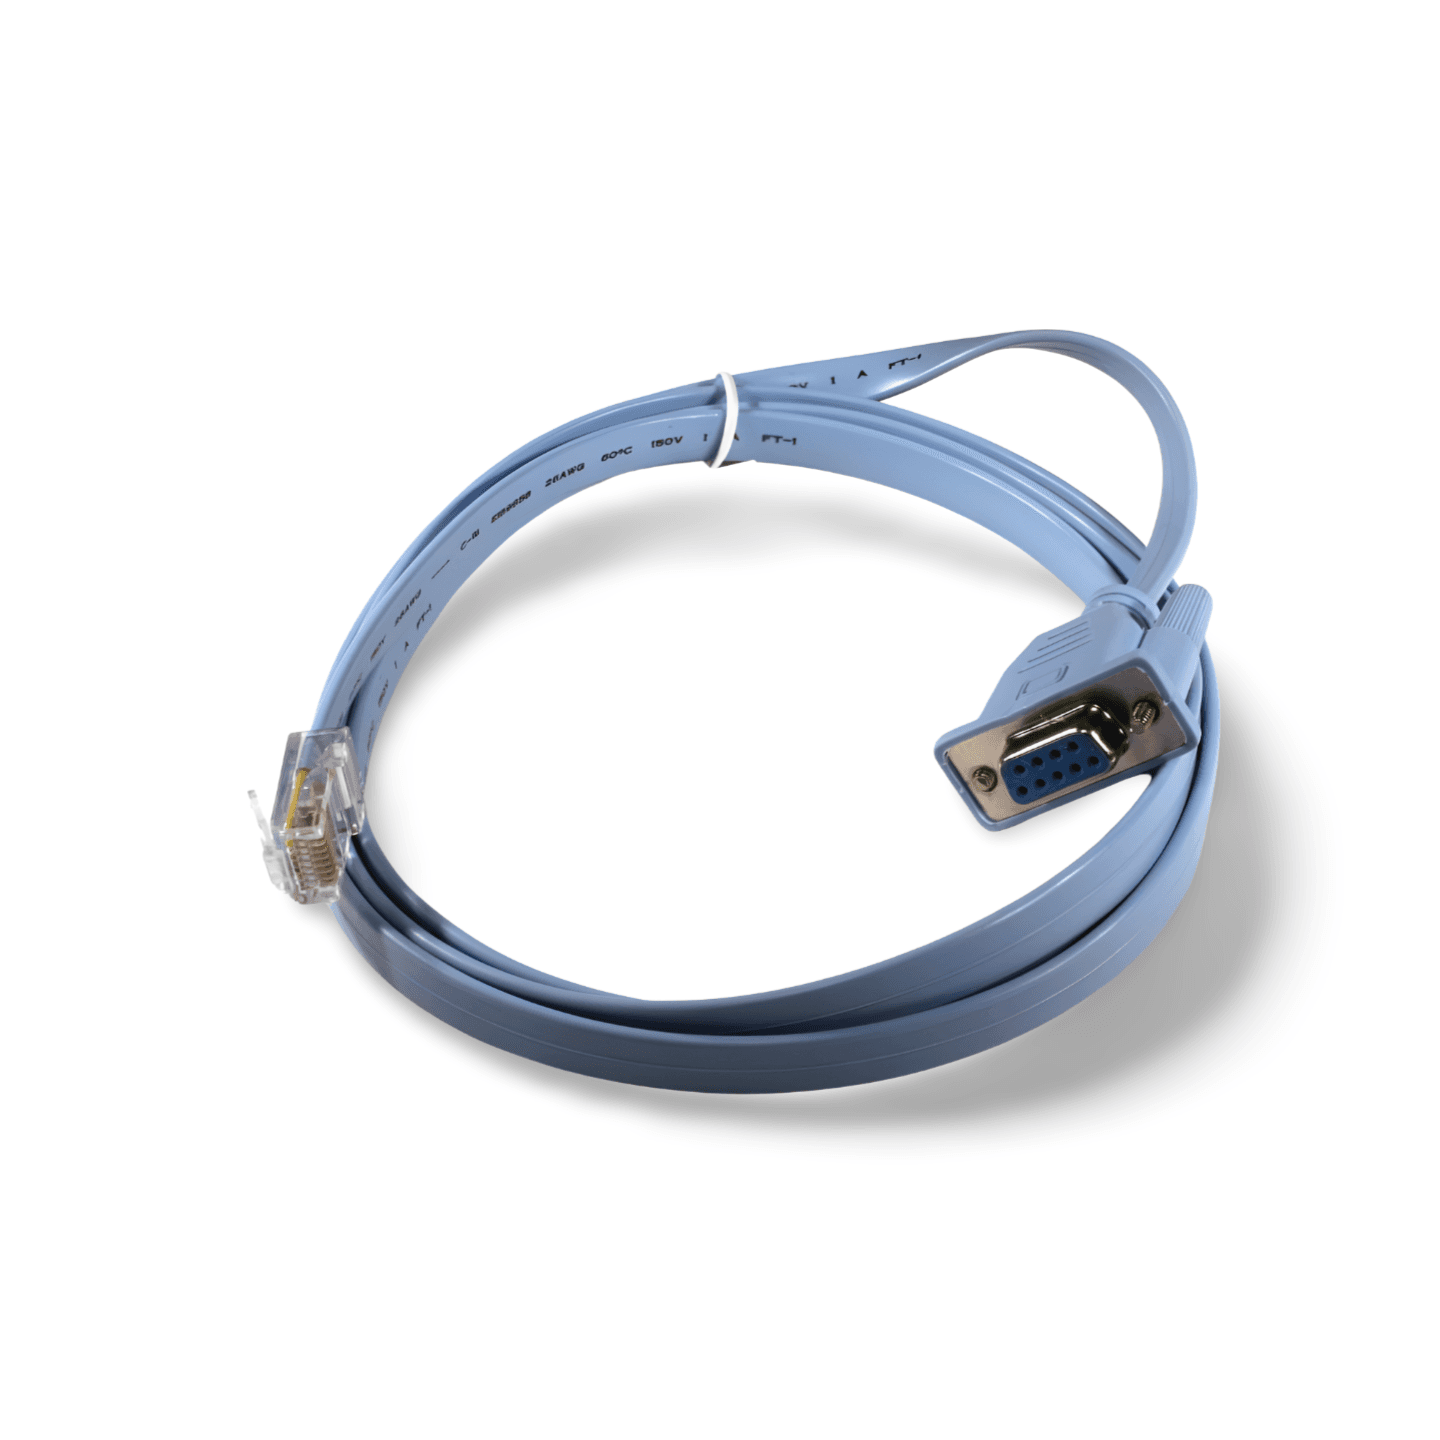 6ft Rollover Console Cable for Cisco RJ45 Male to DB9 Female 72 3383 01 blue